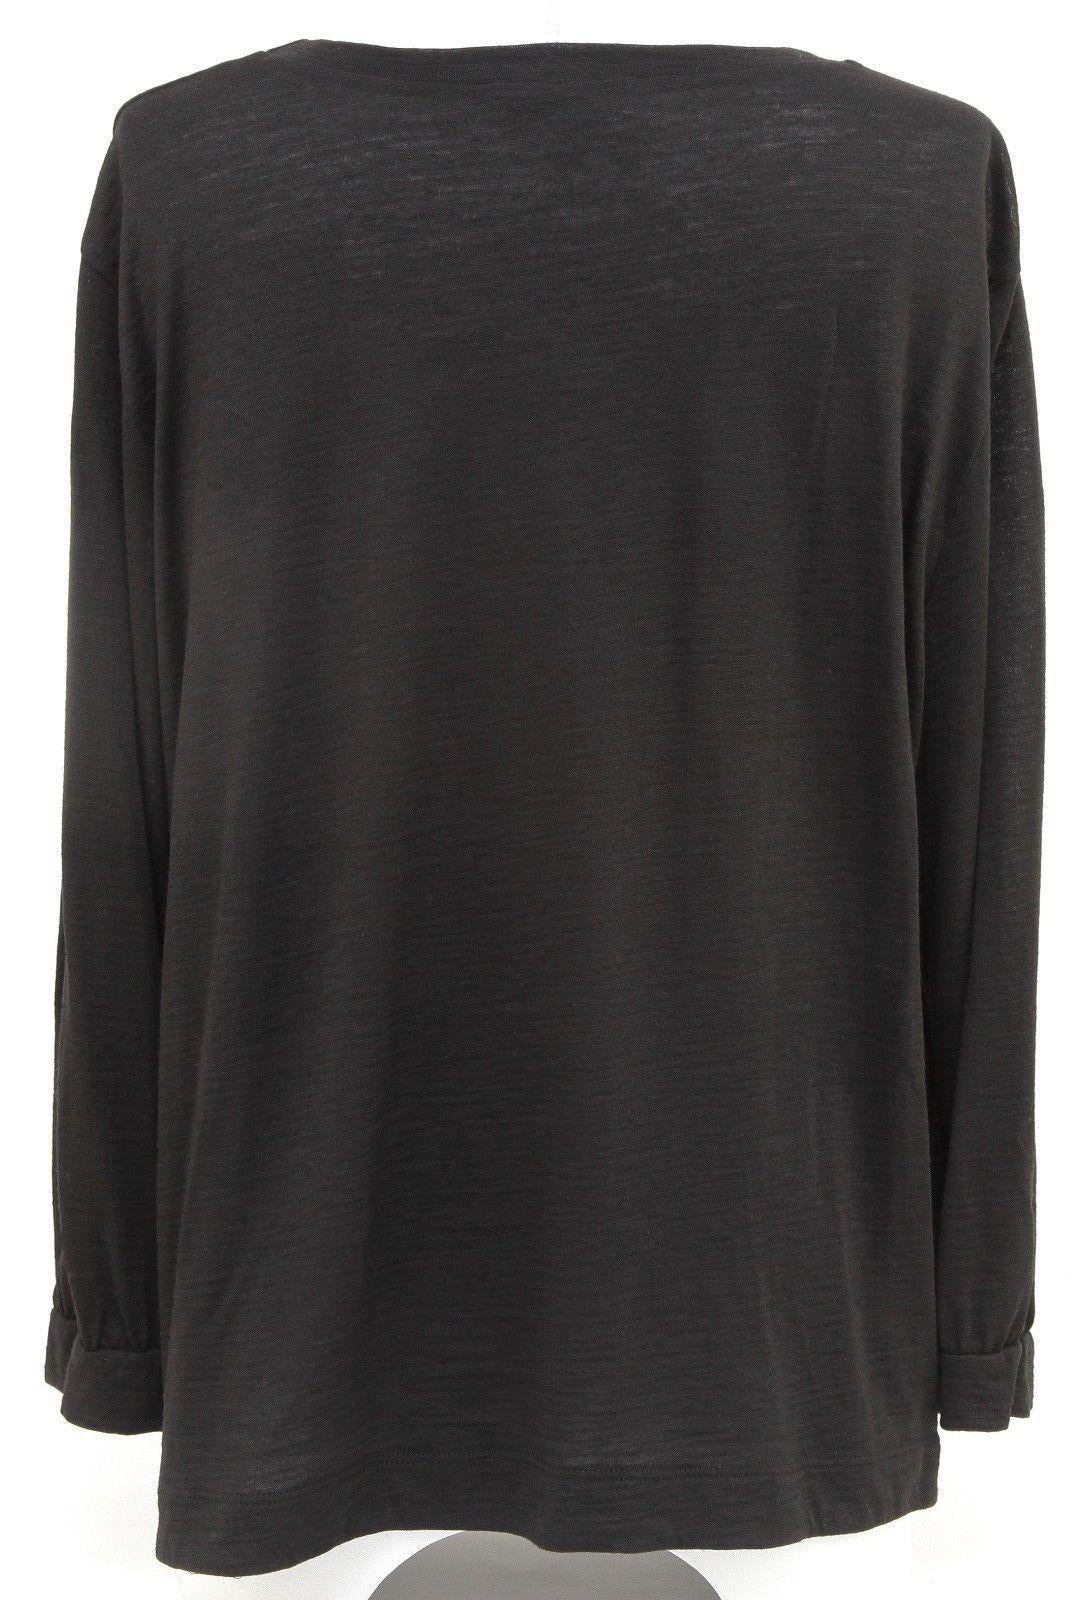 SEE BY CHLOE Sweater Knit Top Black 3/4 Length Sleeve Scoop Neck Sz F 42 US 10 For Sale 1